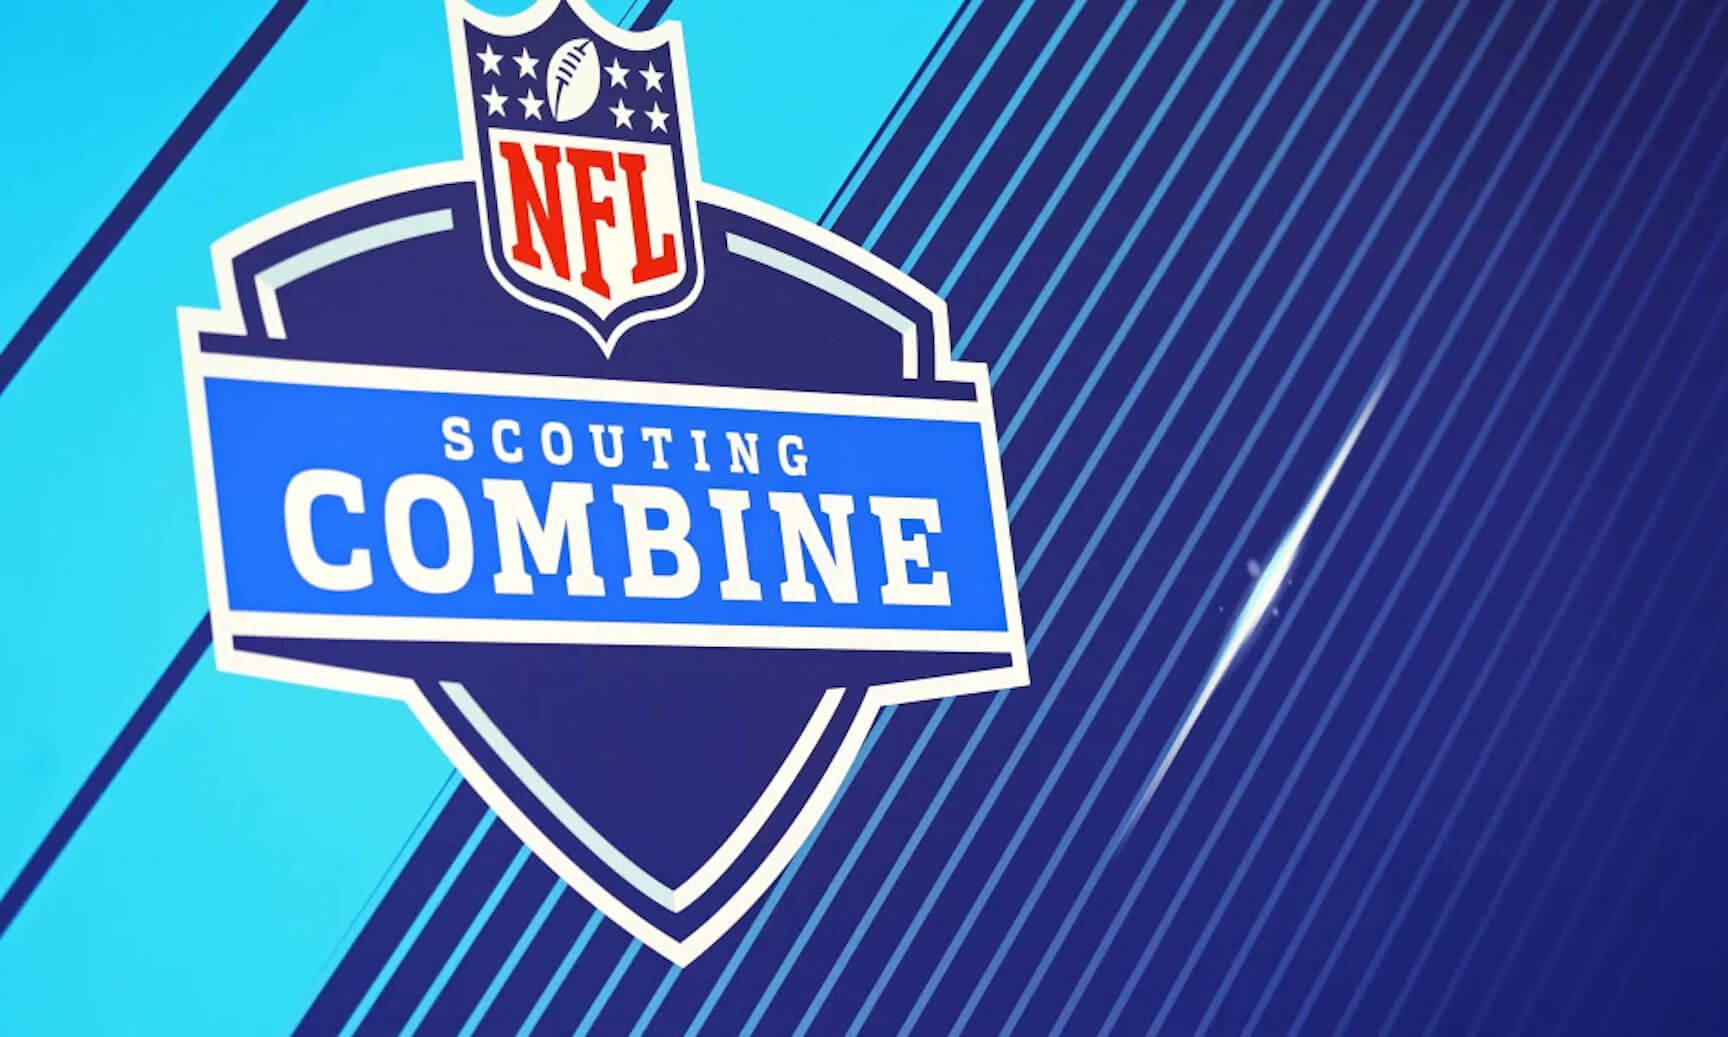 How To Watch The 2023 NFL Scouting Combine